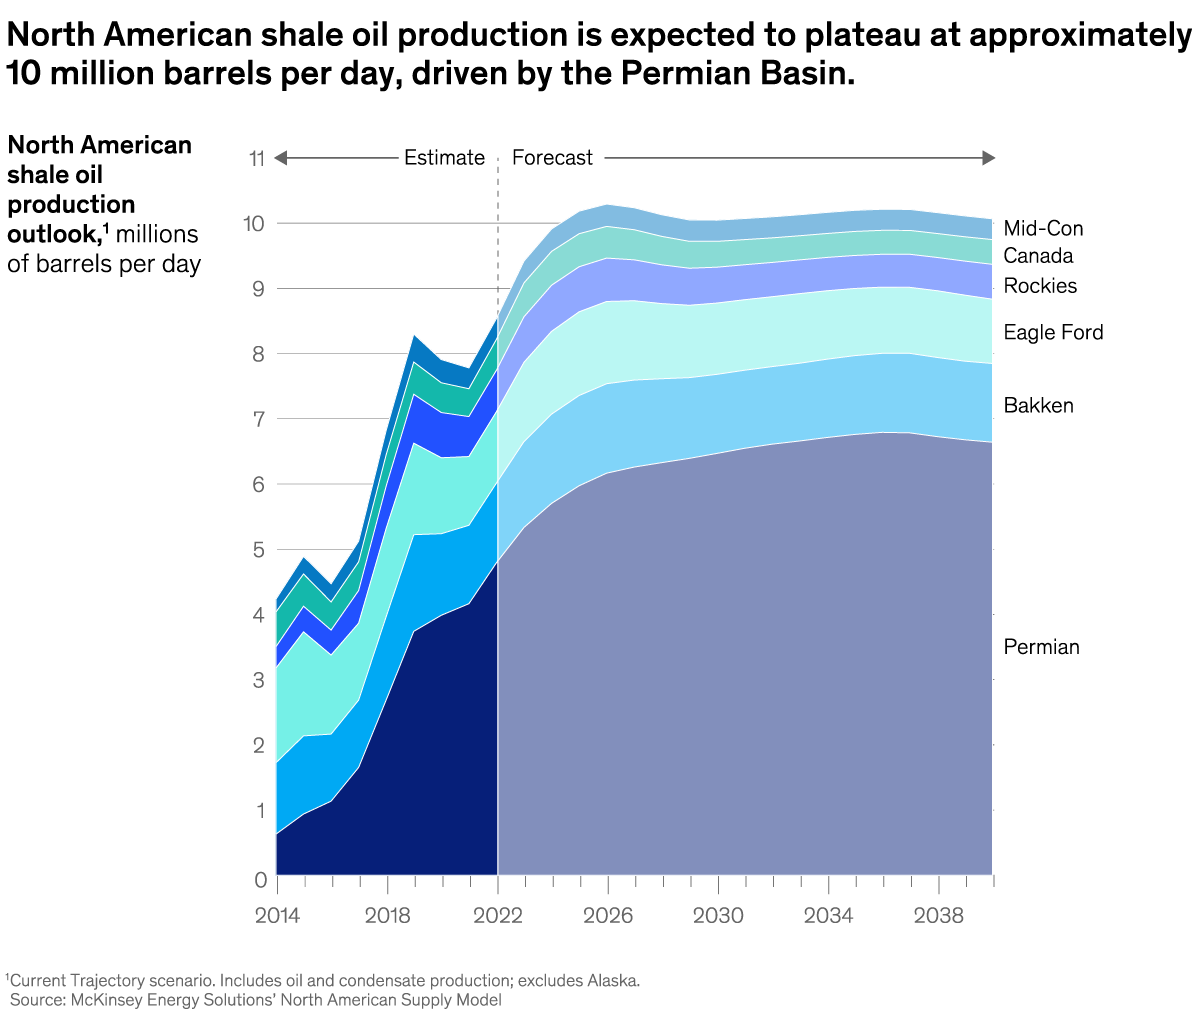 A chart titled “North American shale oil production is expected to plateau at approximately 10 million barrels per day, driven by the Permian Basin.” Click to open the full article on McKinsey.com.